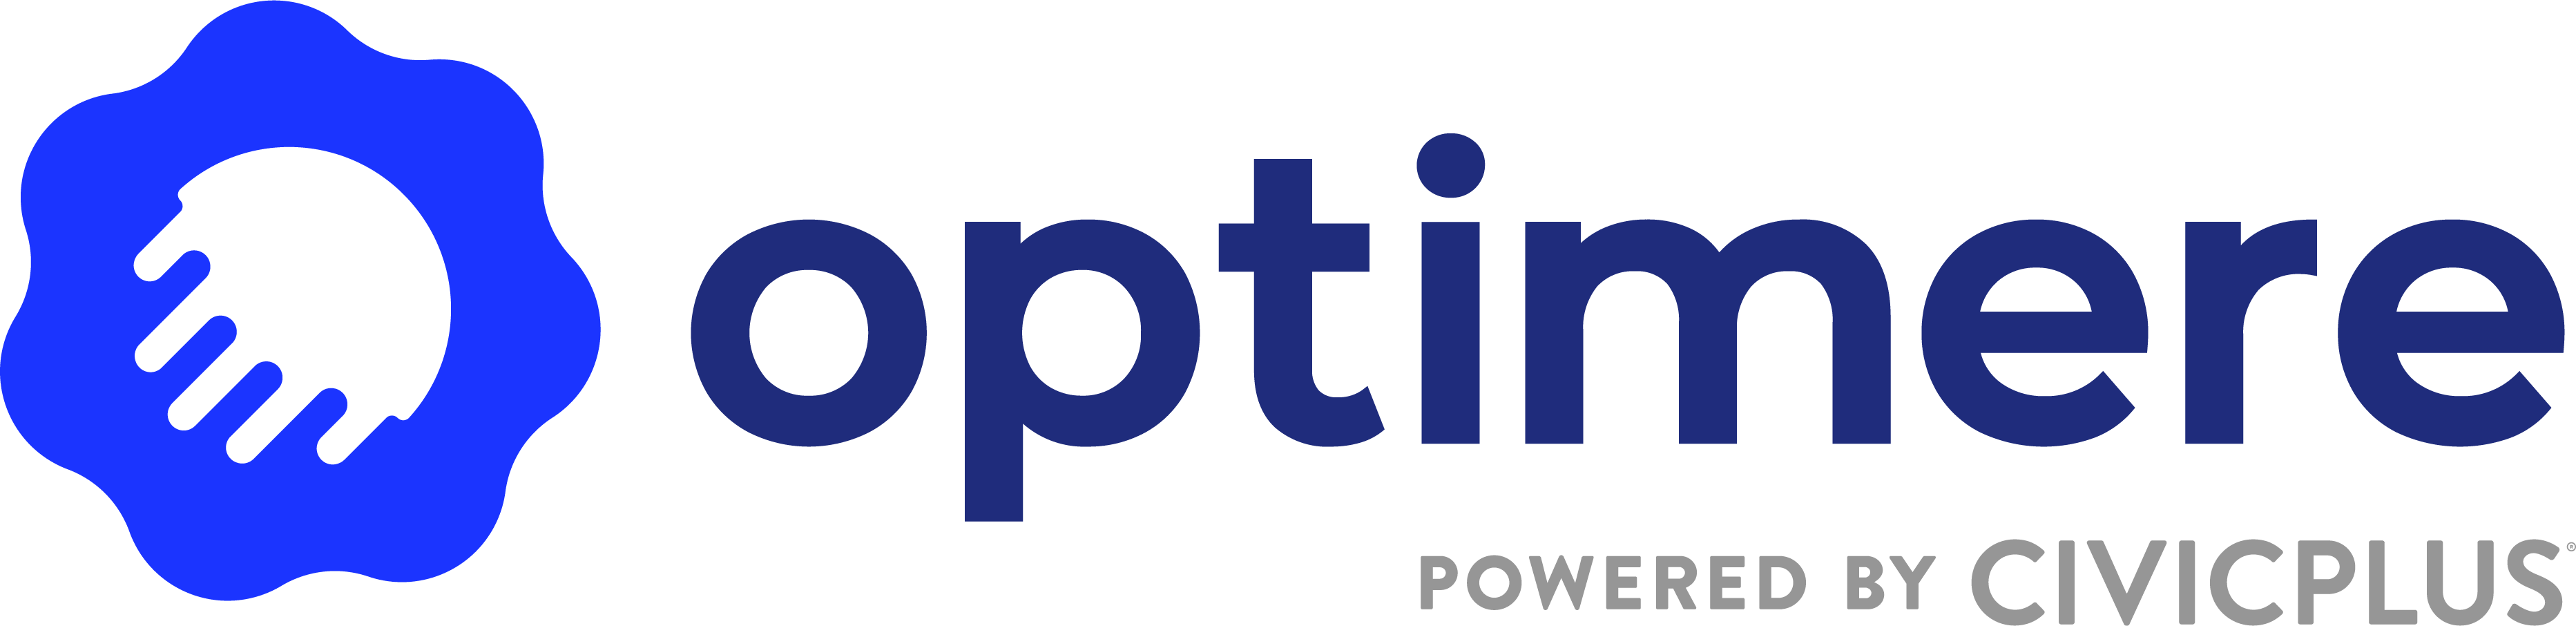 Optimere powered by CivicPlus logo in blue and dark blue